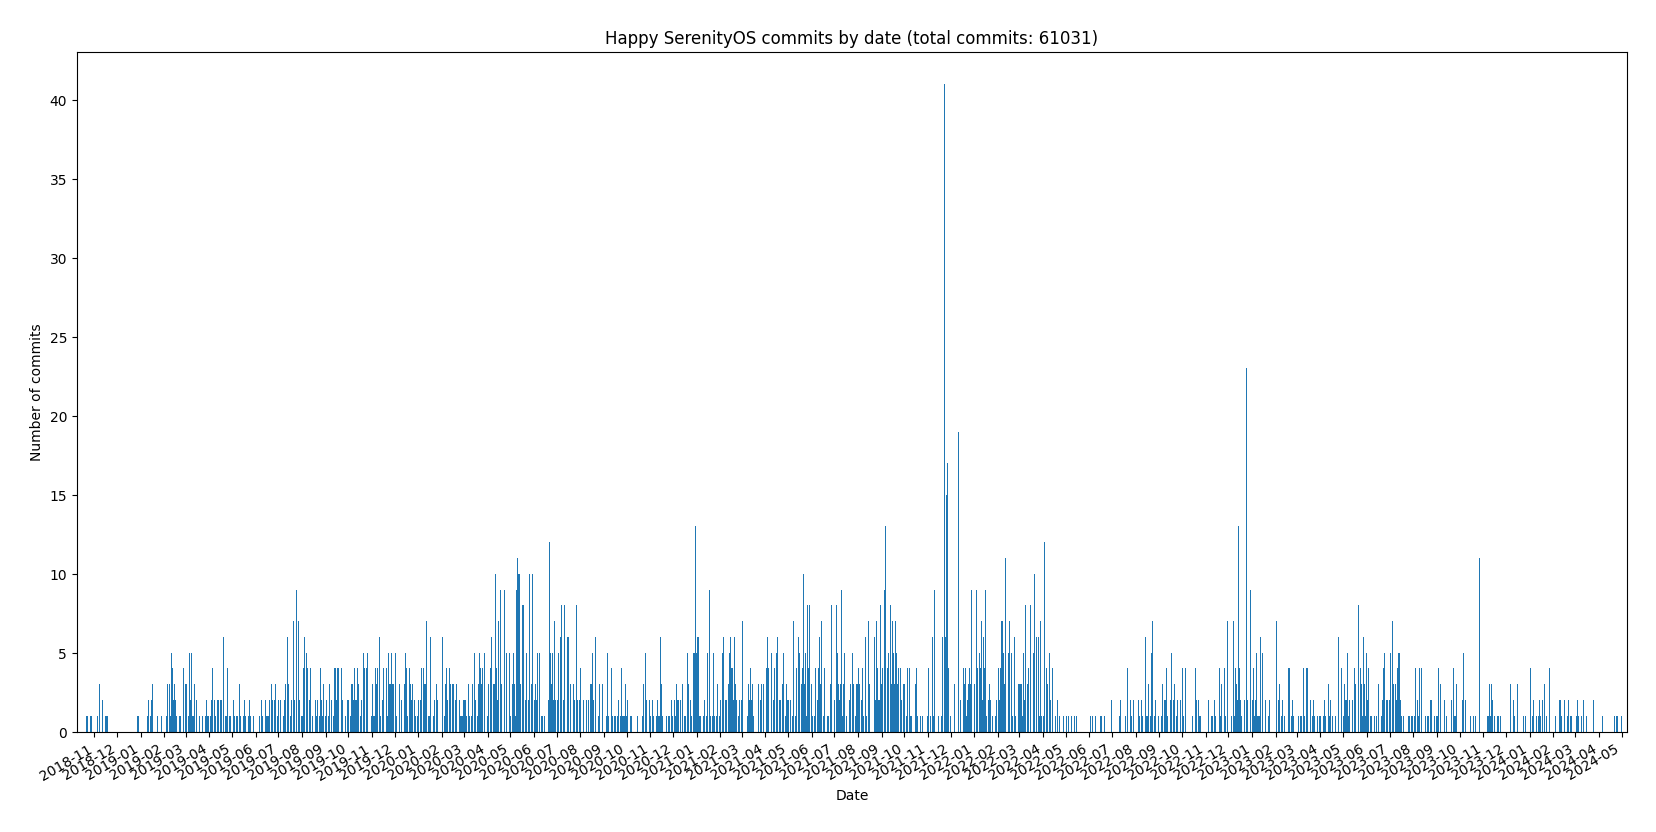 Happy SerenityOS commits by date